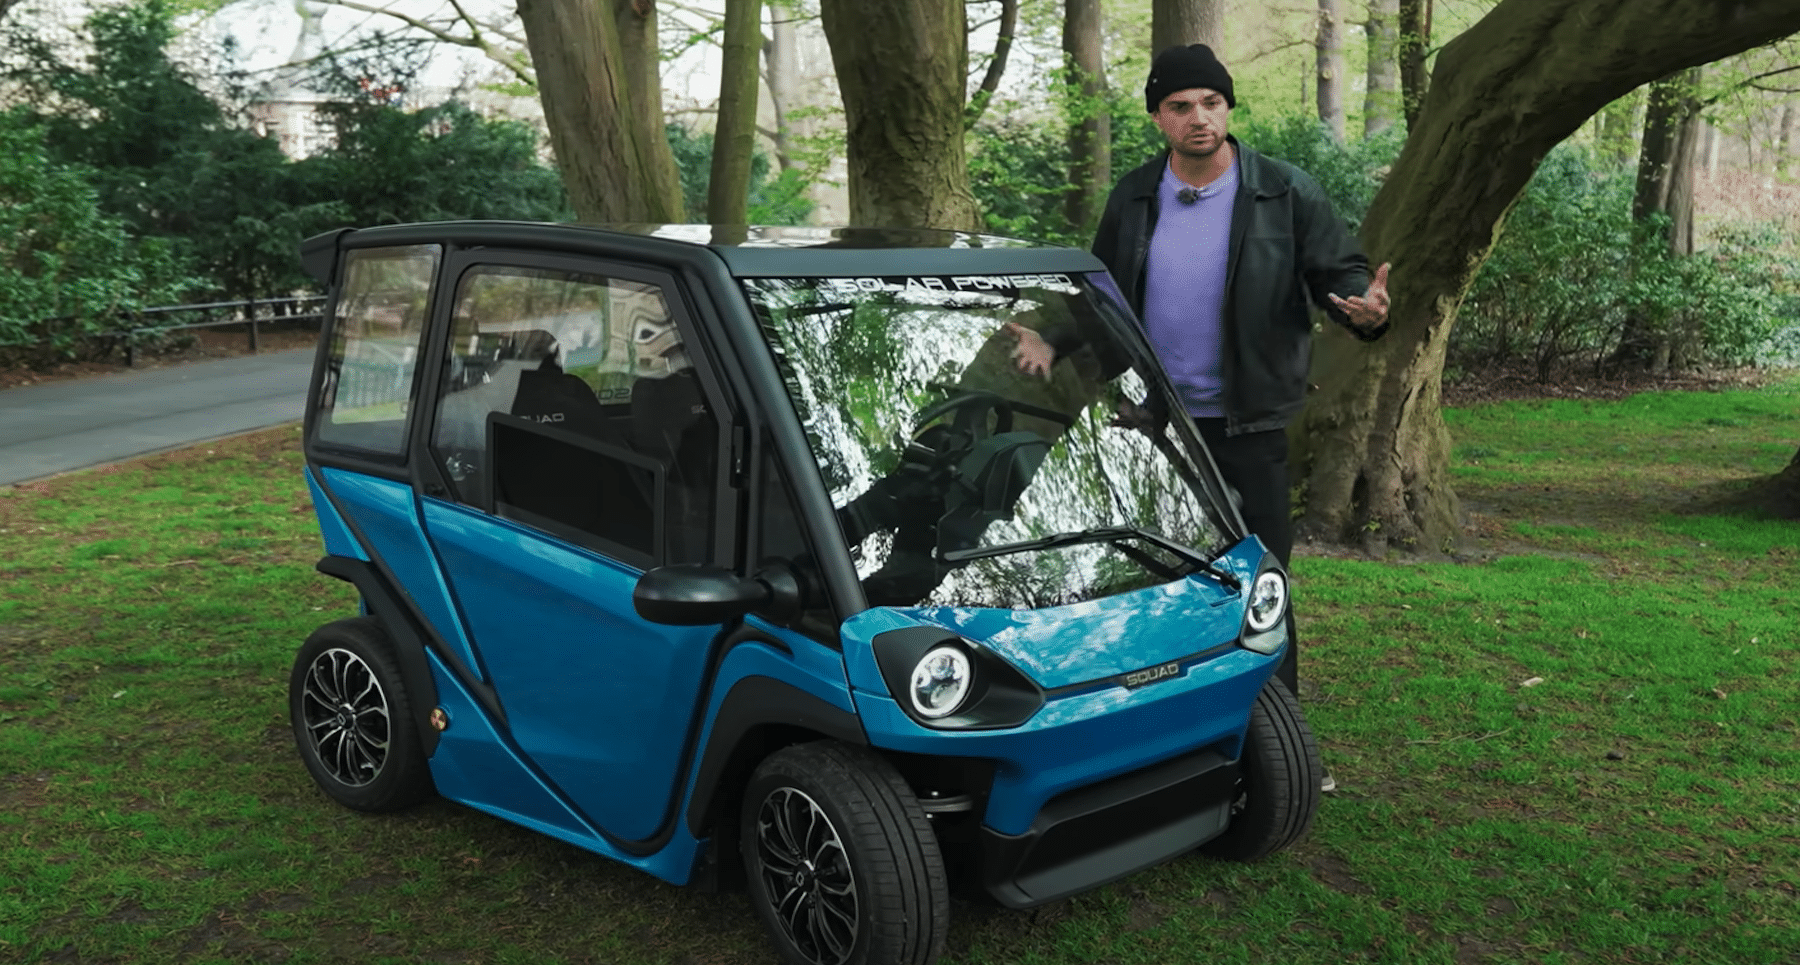 The world’s cheapest solar powered car, by Jack from The Fully Charged Show